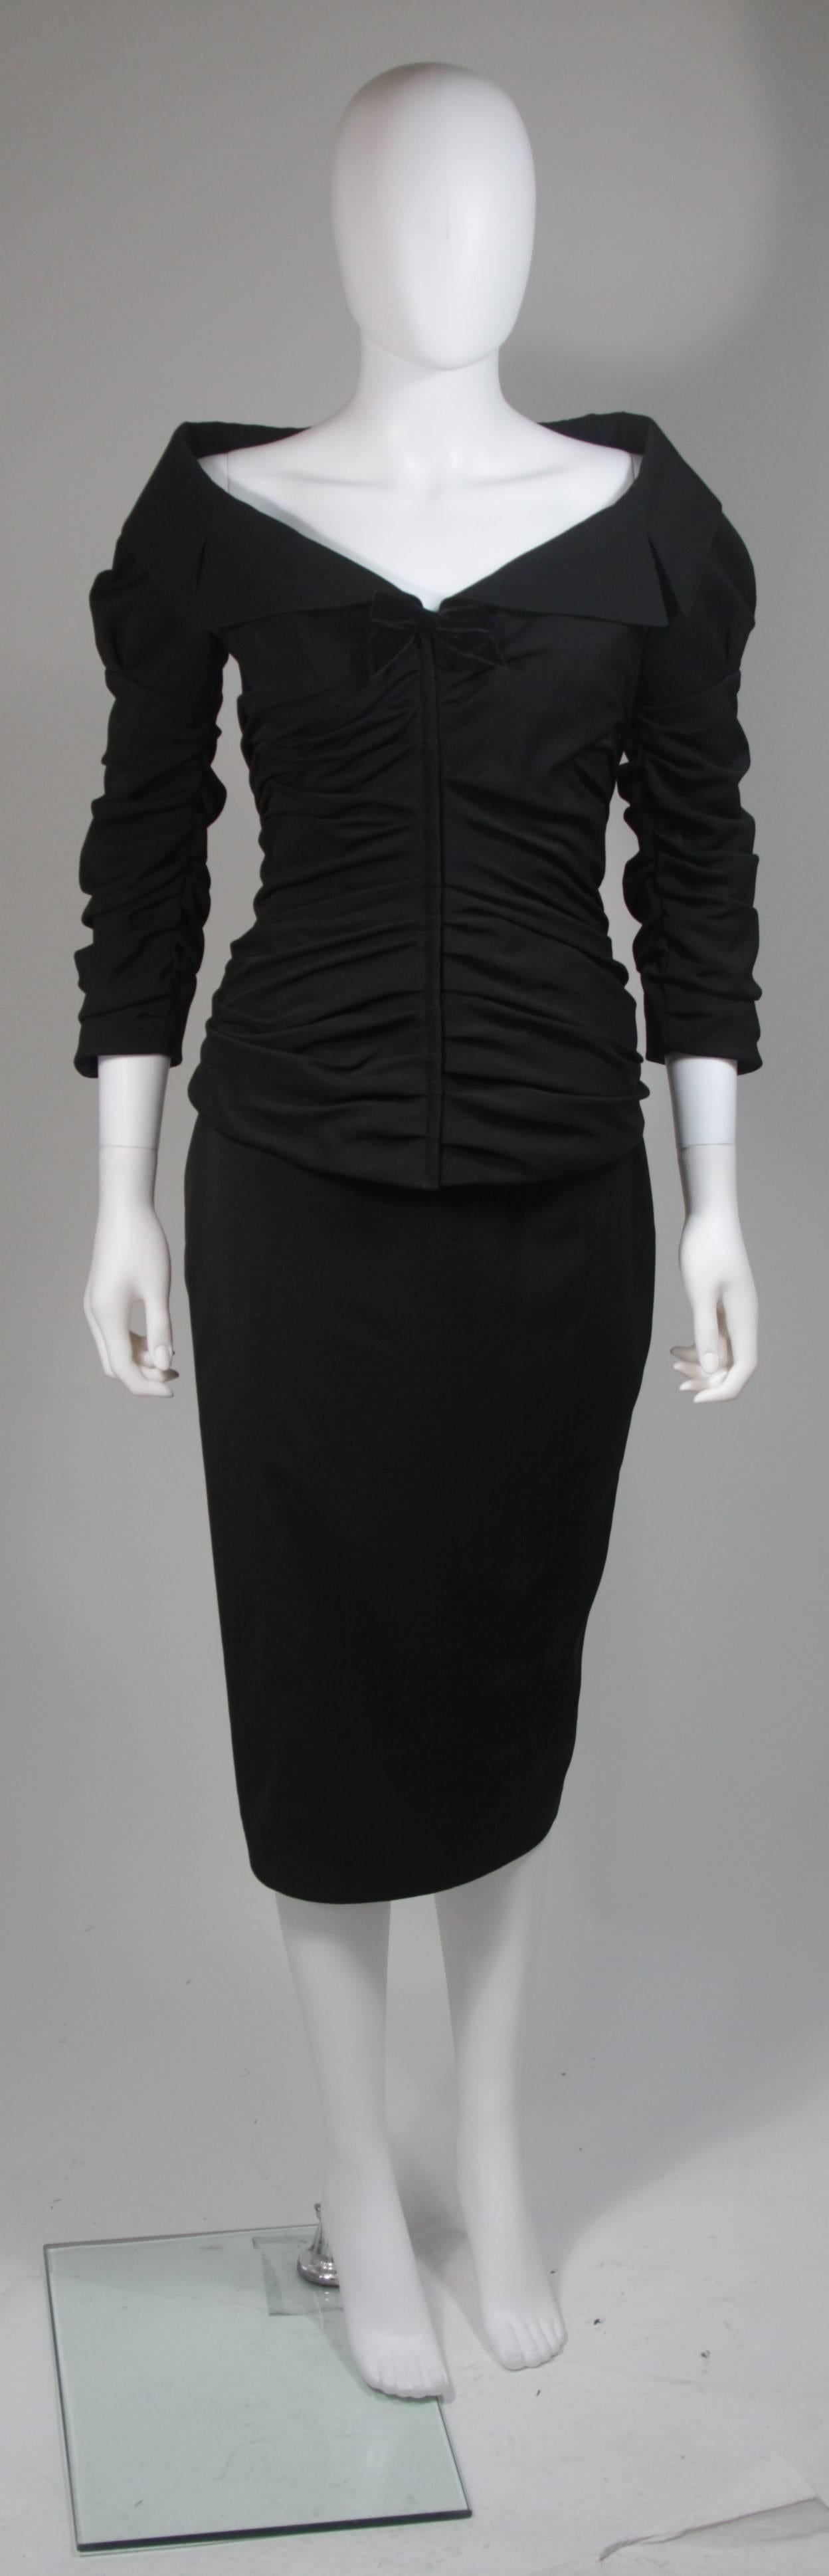 This Thierry Mugler skirt suit is composed of a black material and features rouching throughout the jacket. The jacket has a center front zipper and velvet bow, along with an off the collar design. The skirt has a classic pencil silhouette with